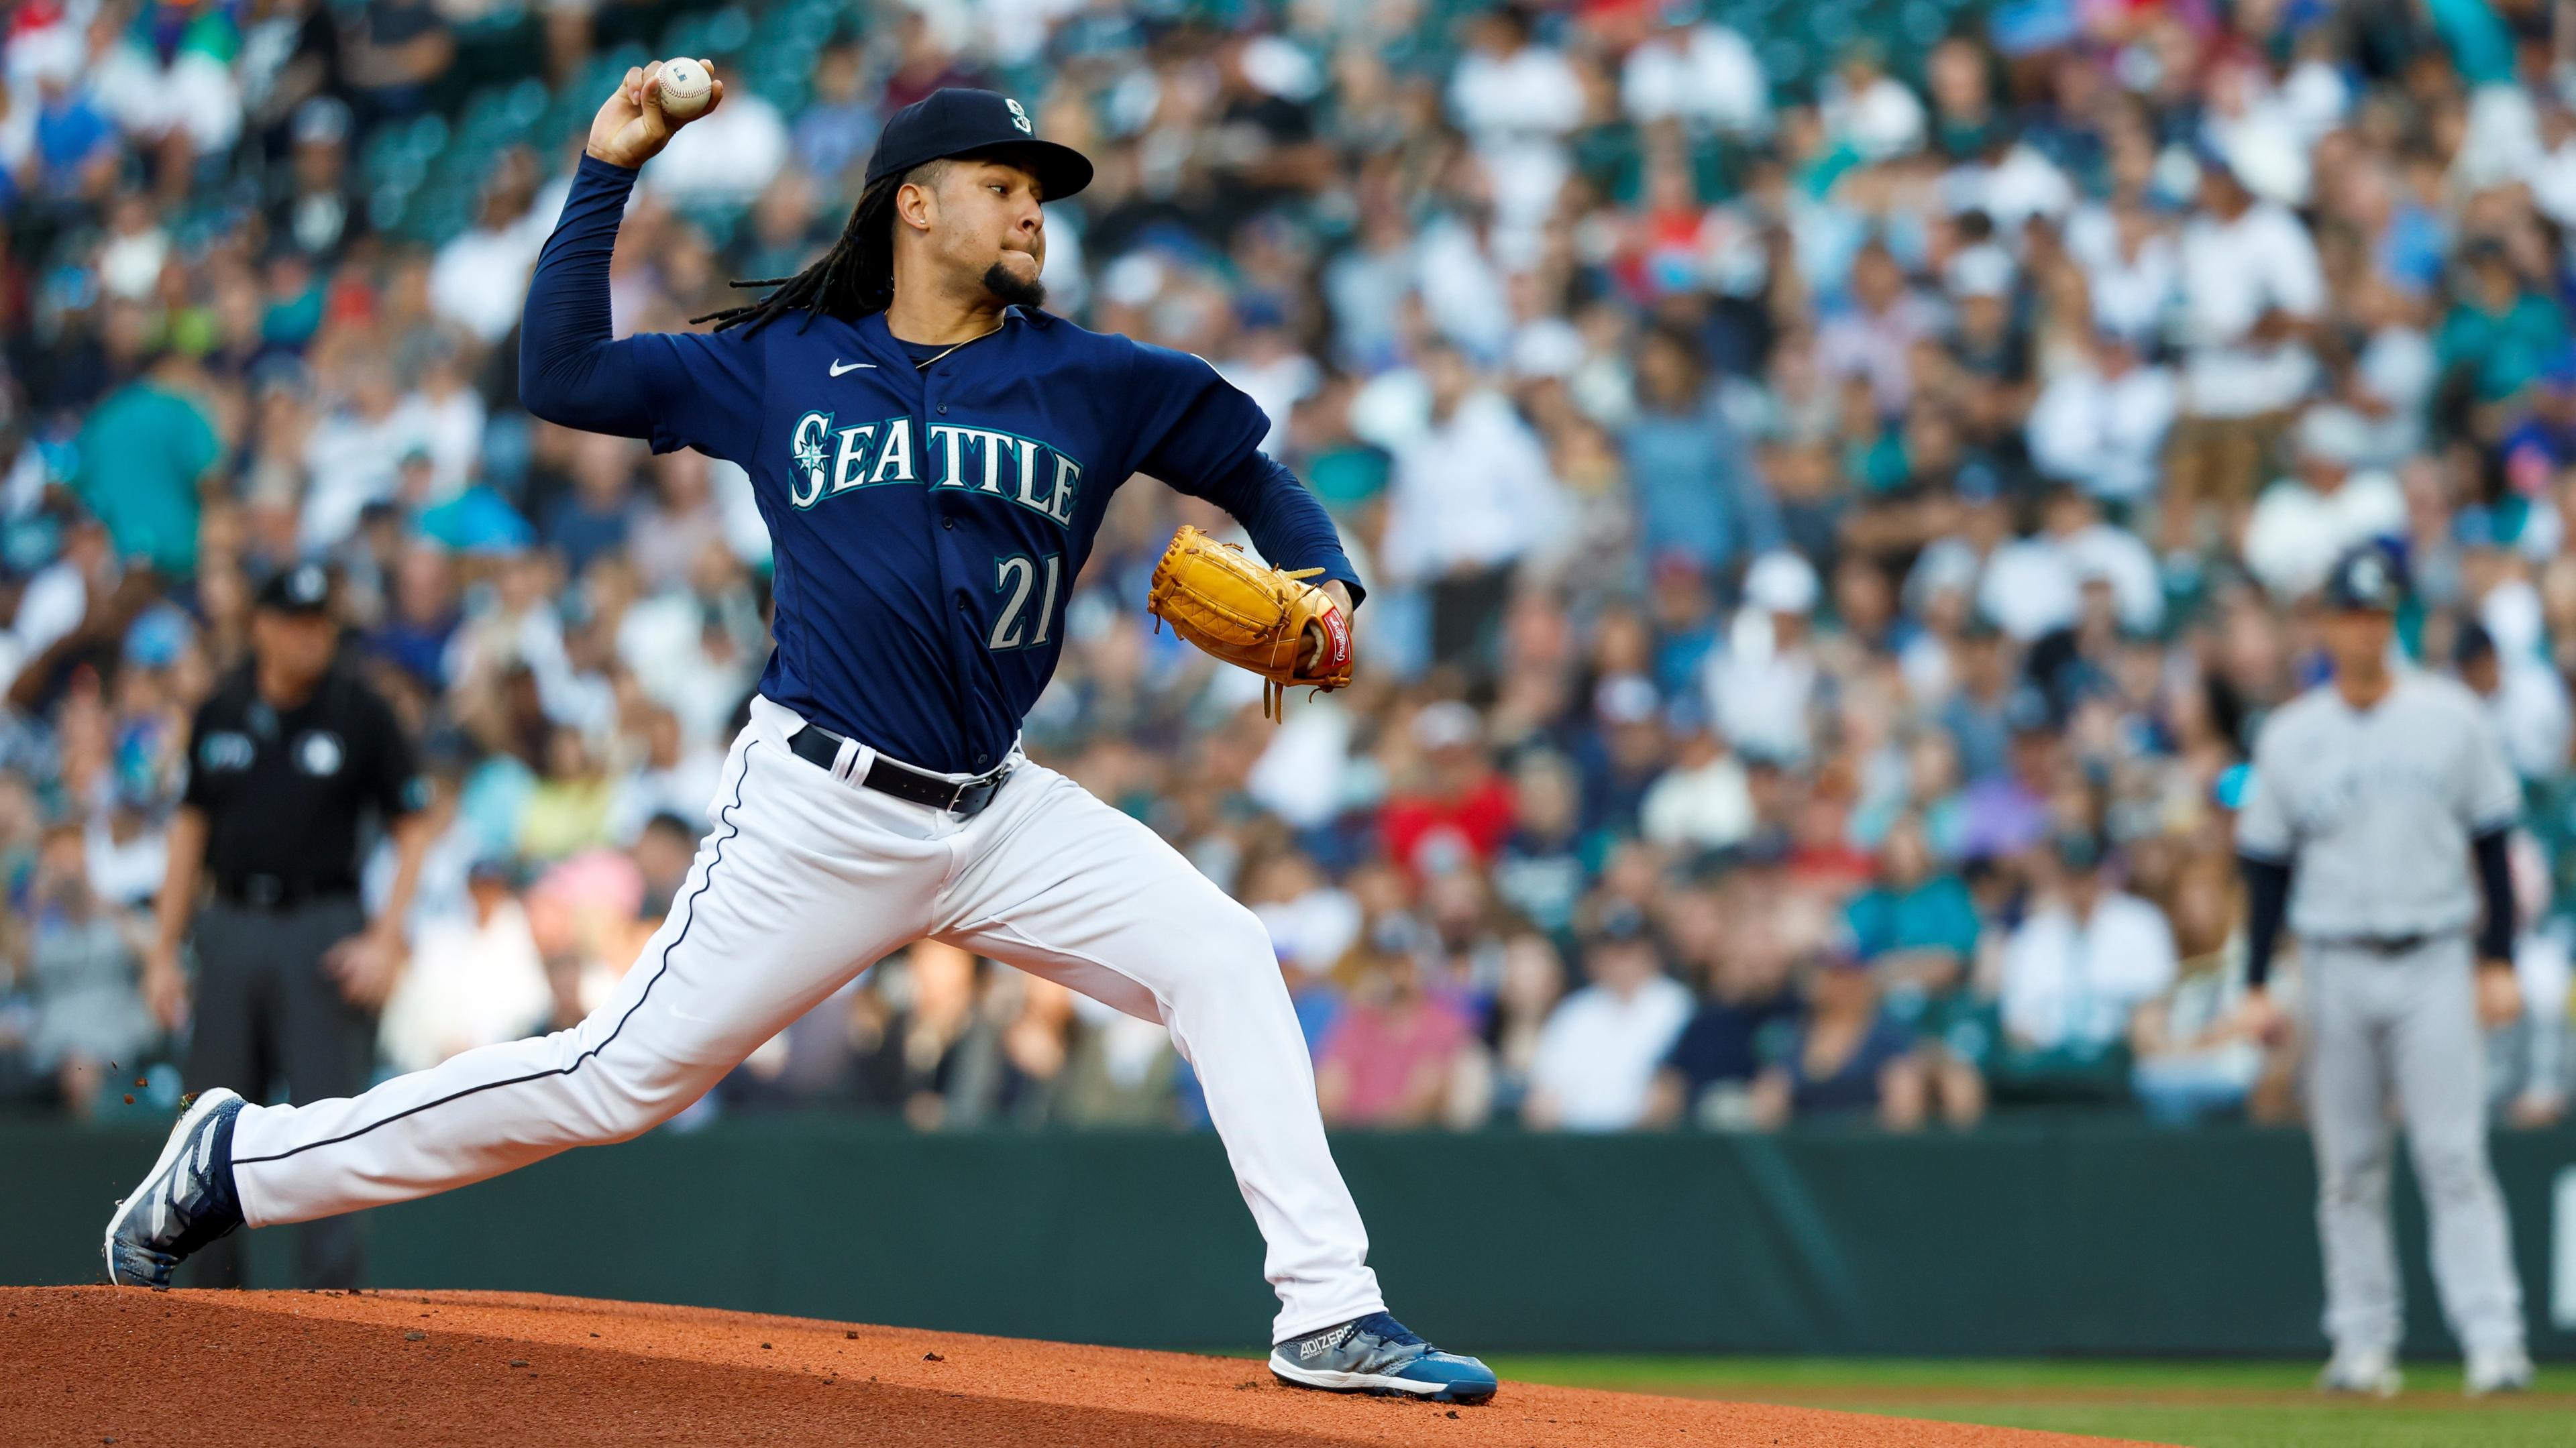 Aug 9, 2022; Seattle, Washington, USA; Seattle Mariners starting pitcher Luis Castillo (21) throws against the New York Yankees during the first inning at T-Mobile Park. / Joe Nicholson-USA TODAY Sports